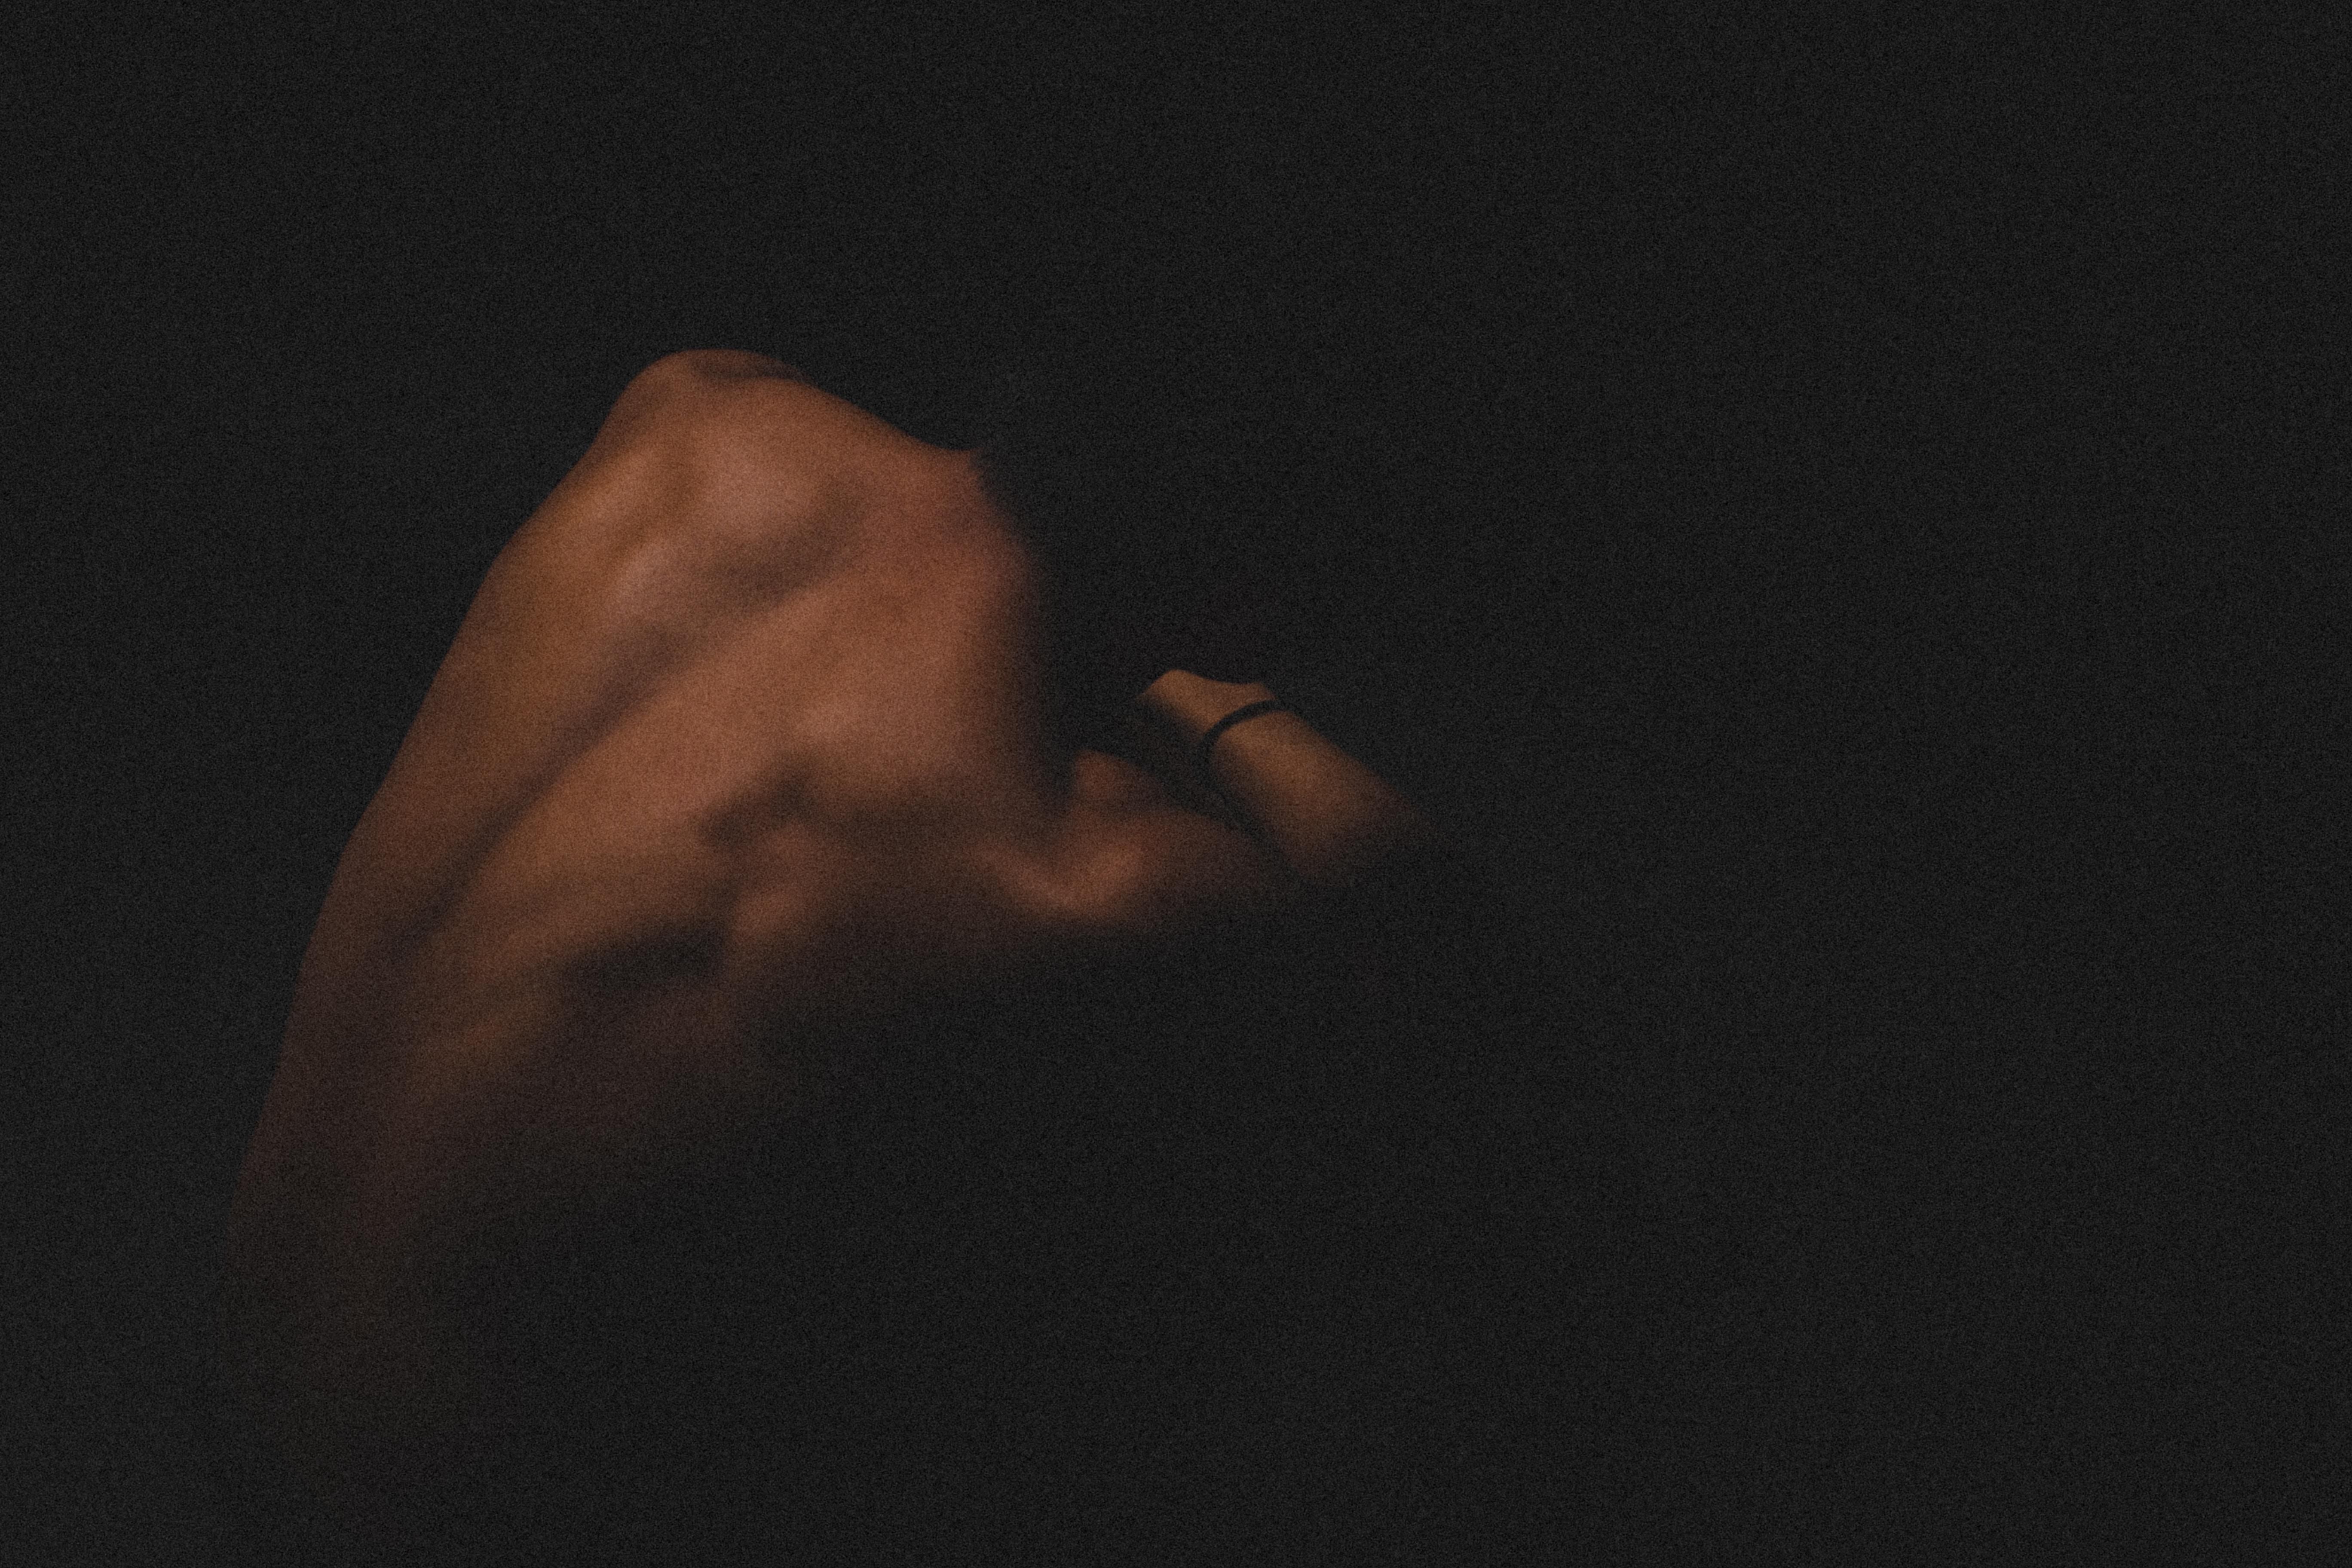 A naked person cowering in the dark